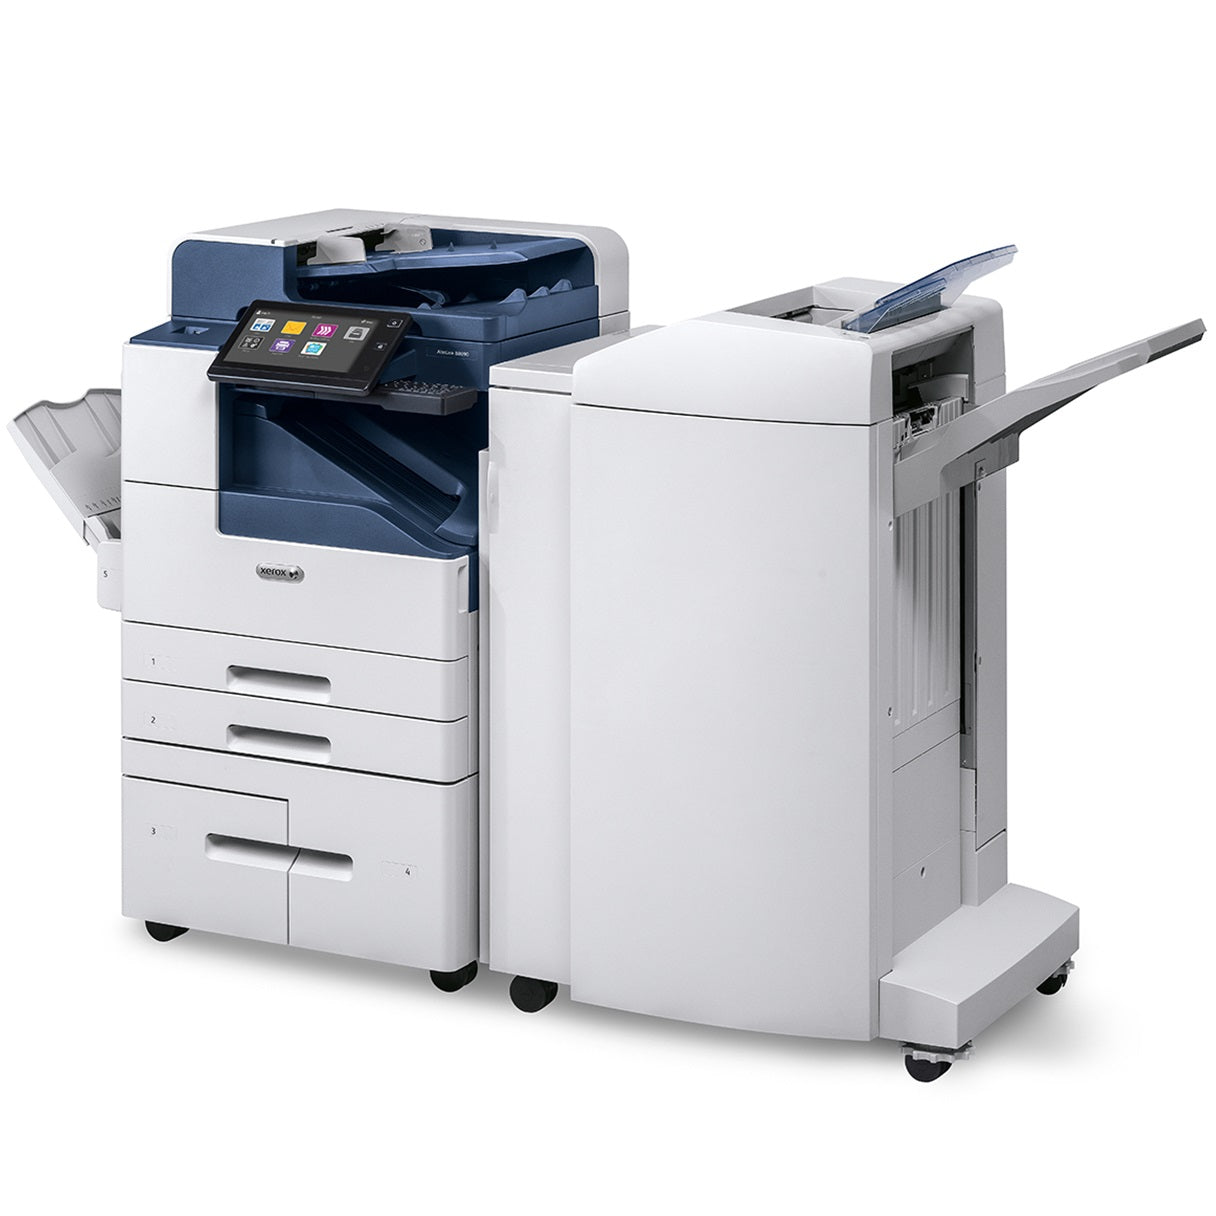 Absolute Toner $125/Month REPOSSESSED Xerox Altalink B8090 Black and White Multifunction Printer Copier Scanner With High Speed 90 Pages Per Minute Office Copiers In Warehouse